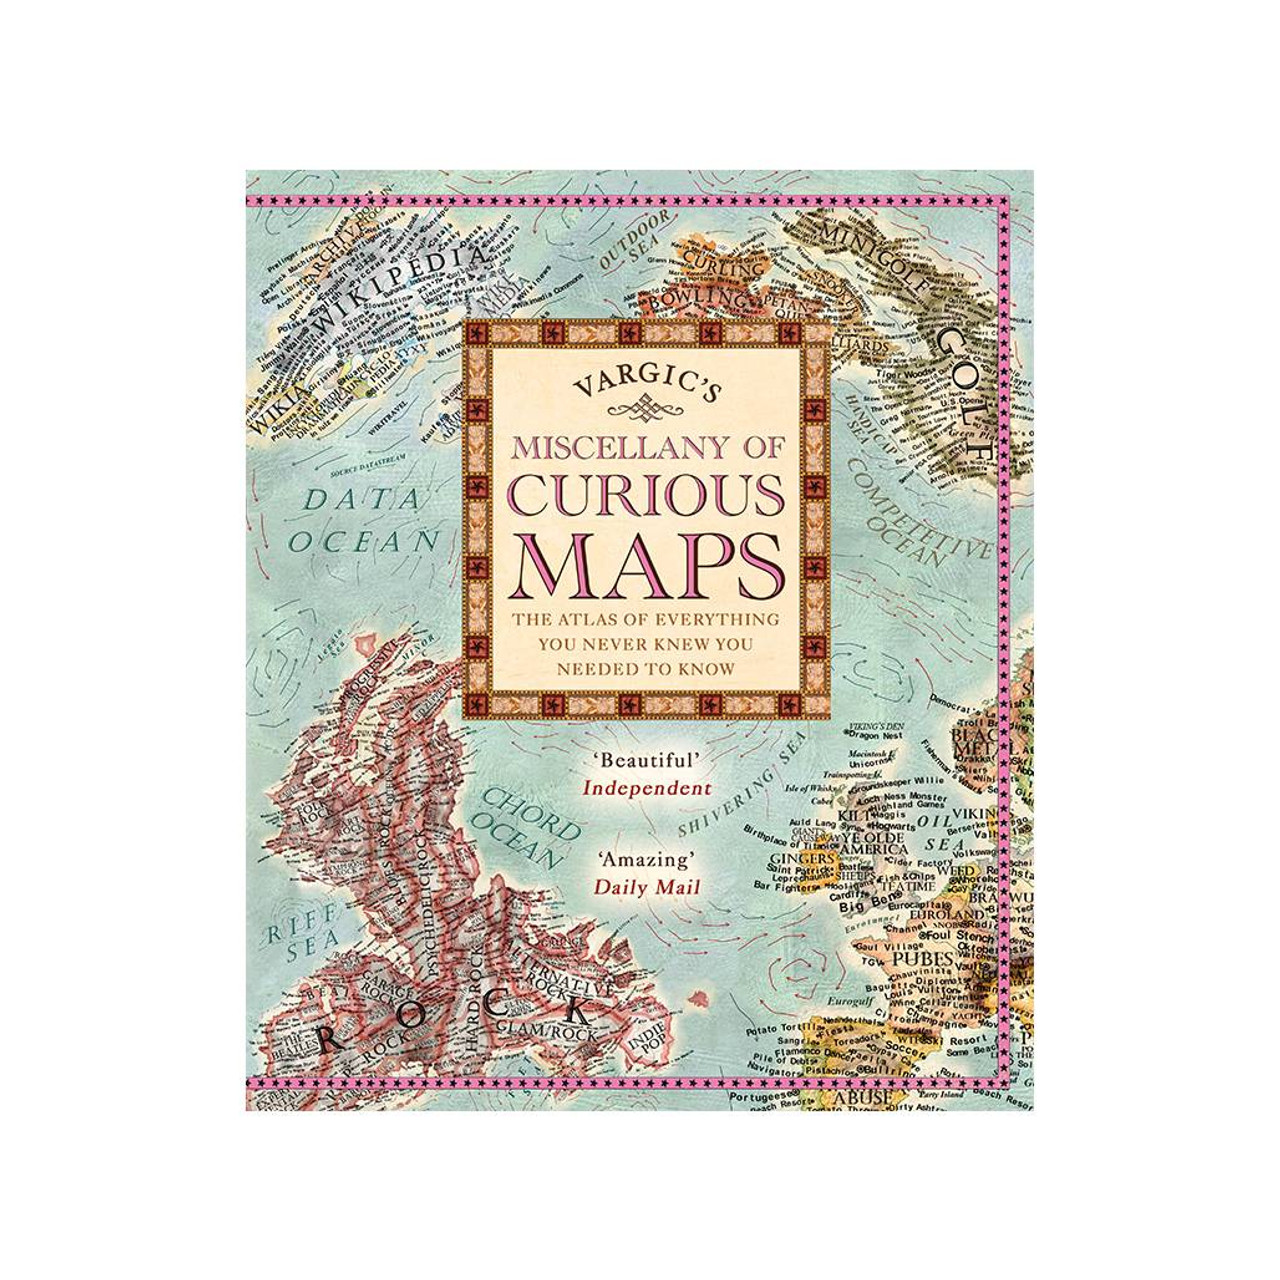 Vargics Miscellany Of Curious Maps: The Atlas Of Everything You Never Knew You Needed To Know